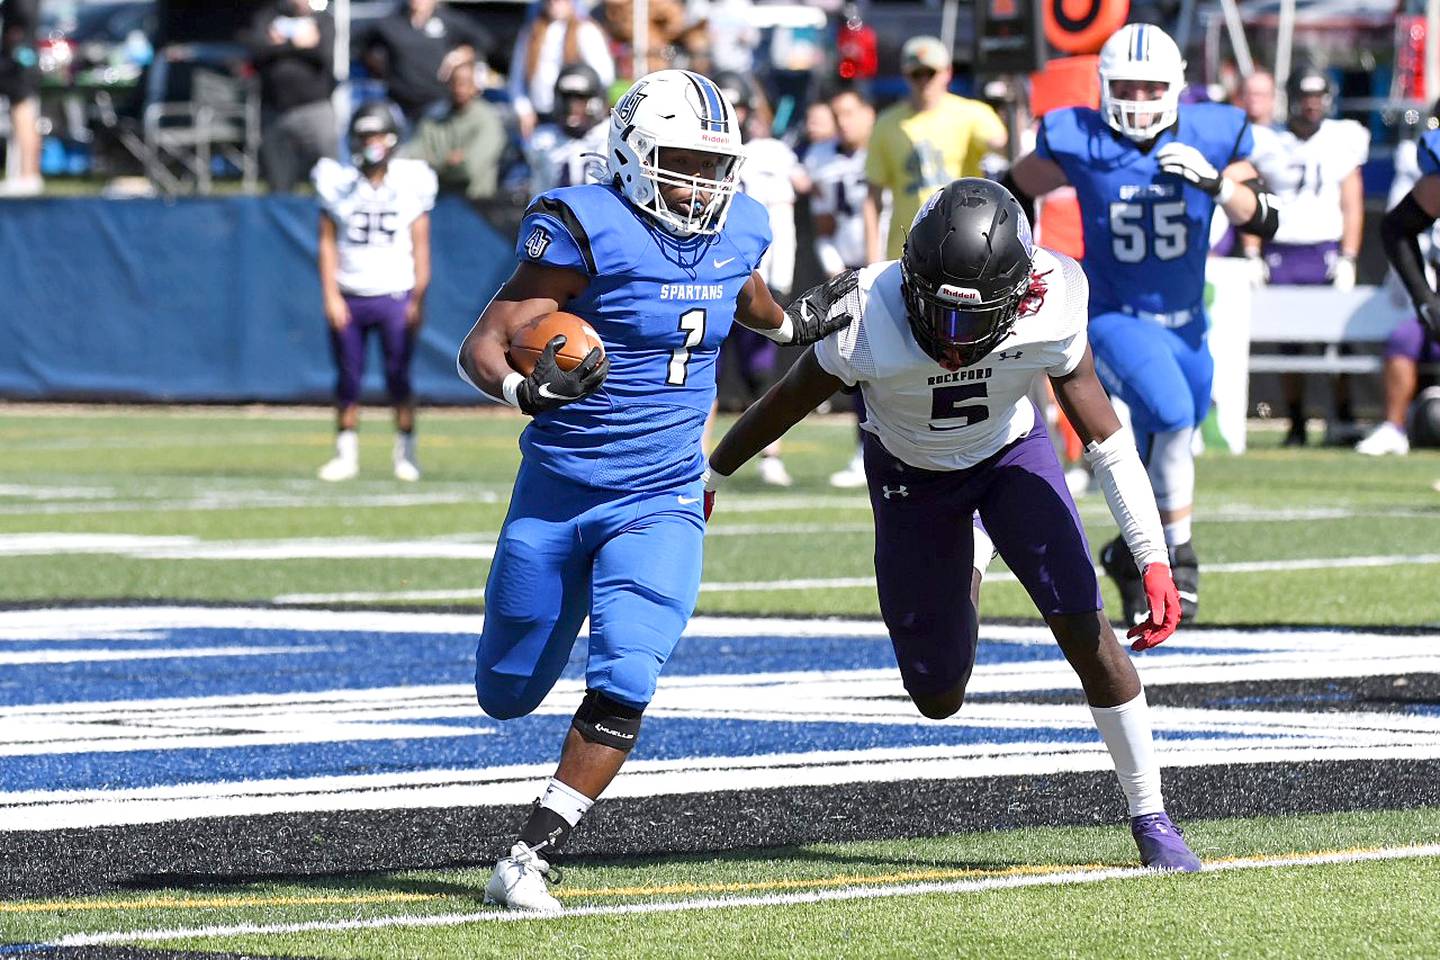 Former Oswego East player Tyran Bailey just became Aurora University's all-time leading rusher.